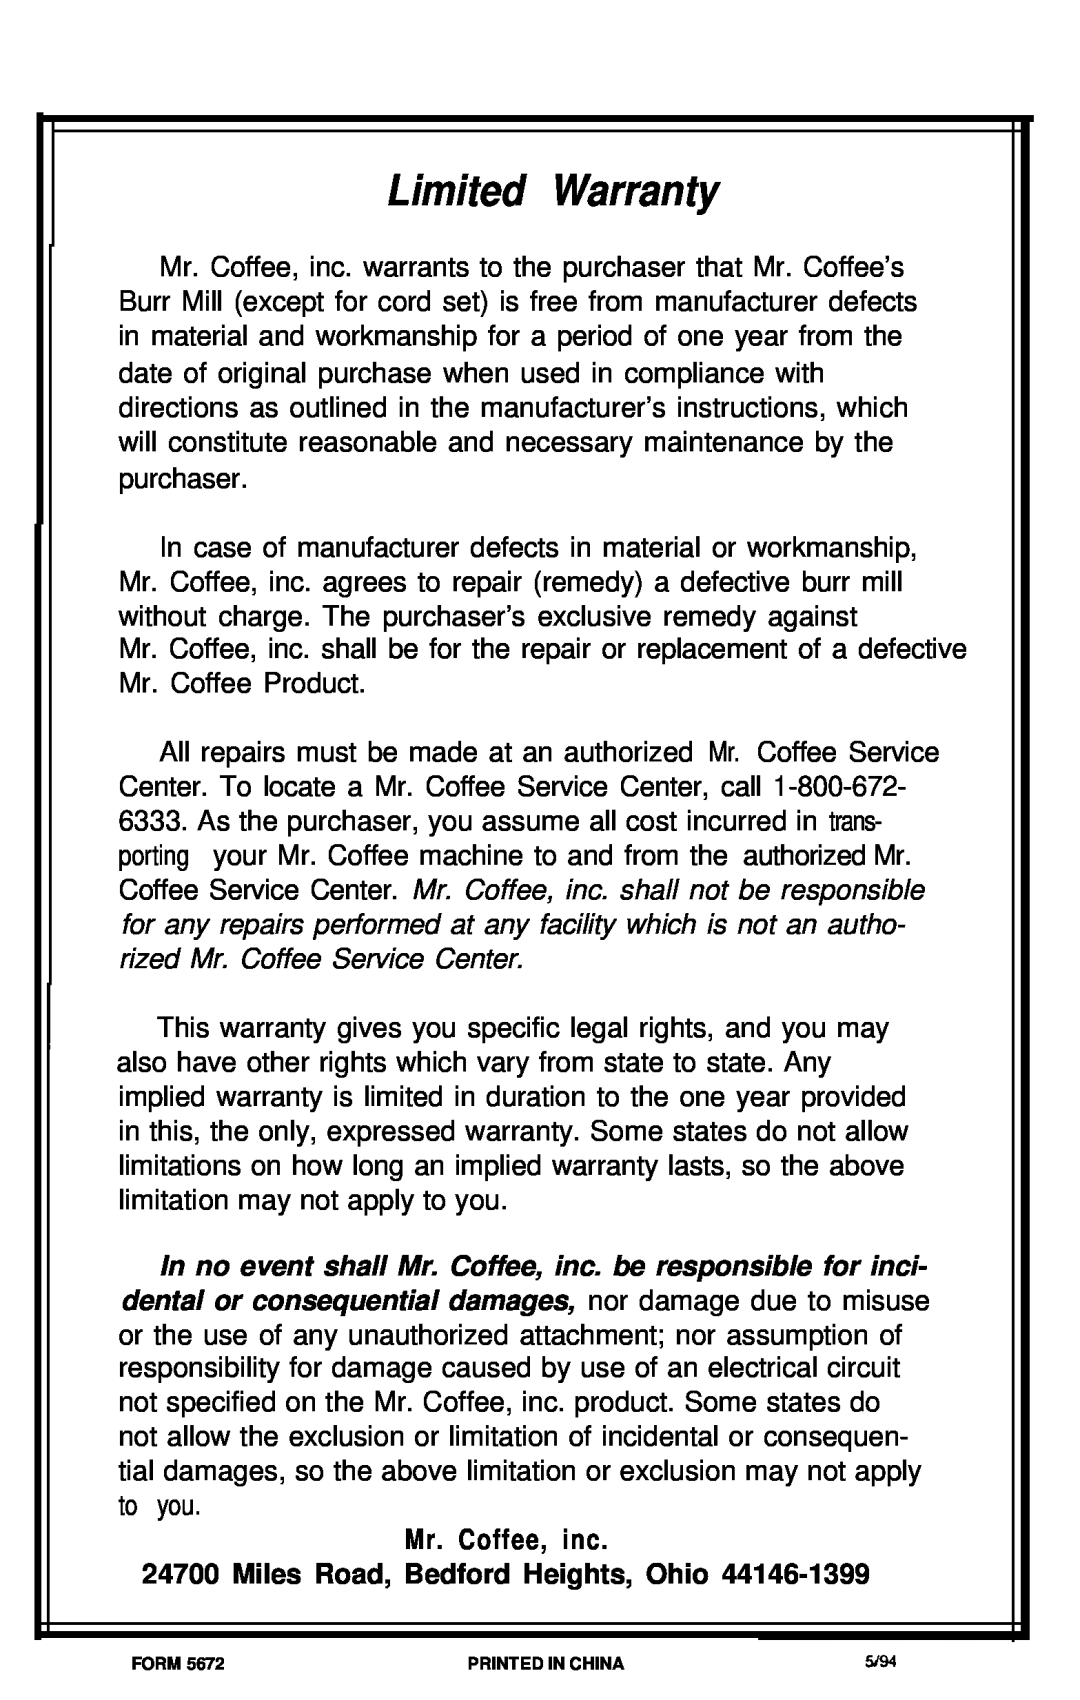 Mr. Coffee BMLD manual Limited Warranty, Mr. Coffee, inc, Miles Road, Bedford Heights, Ohio 